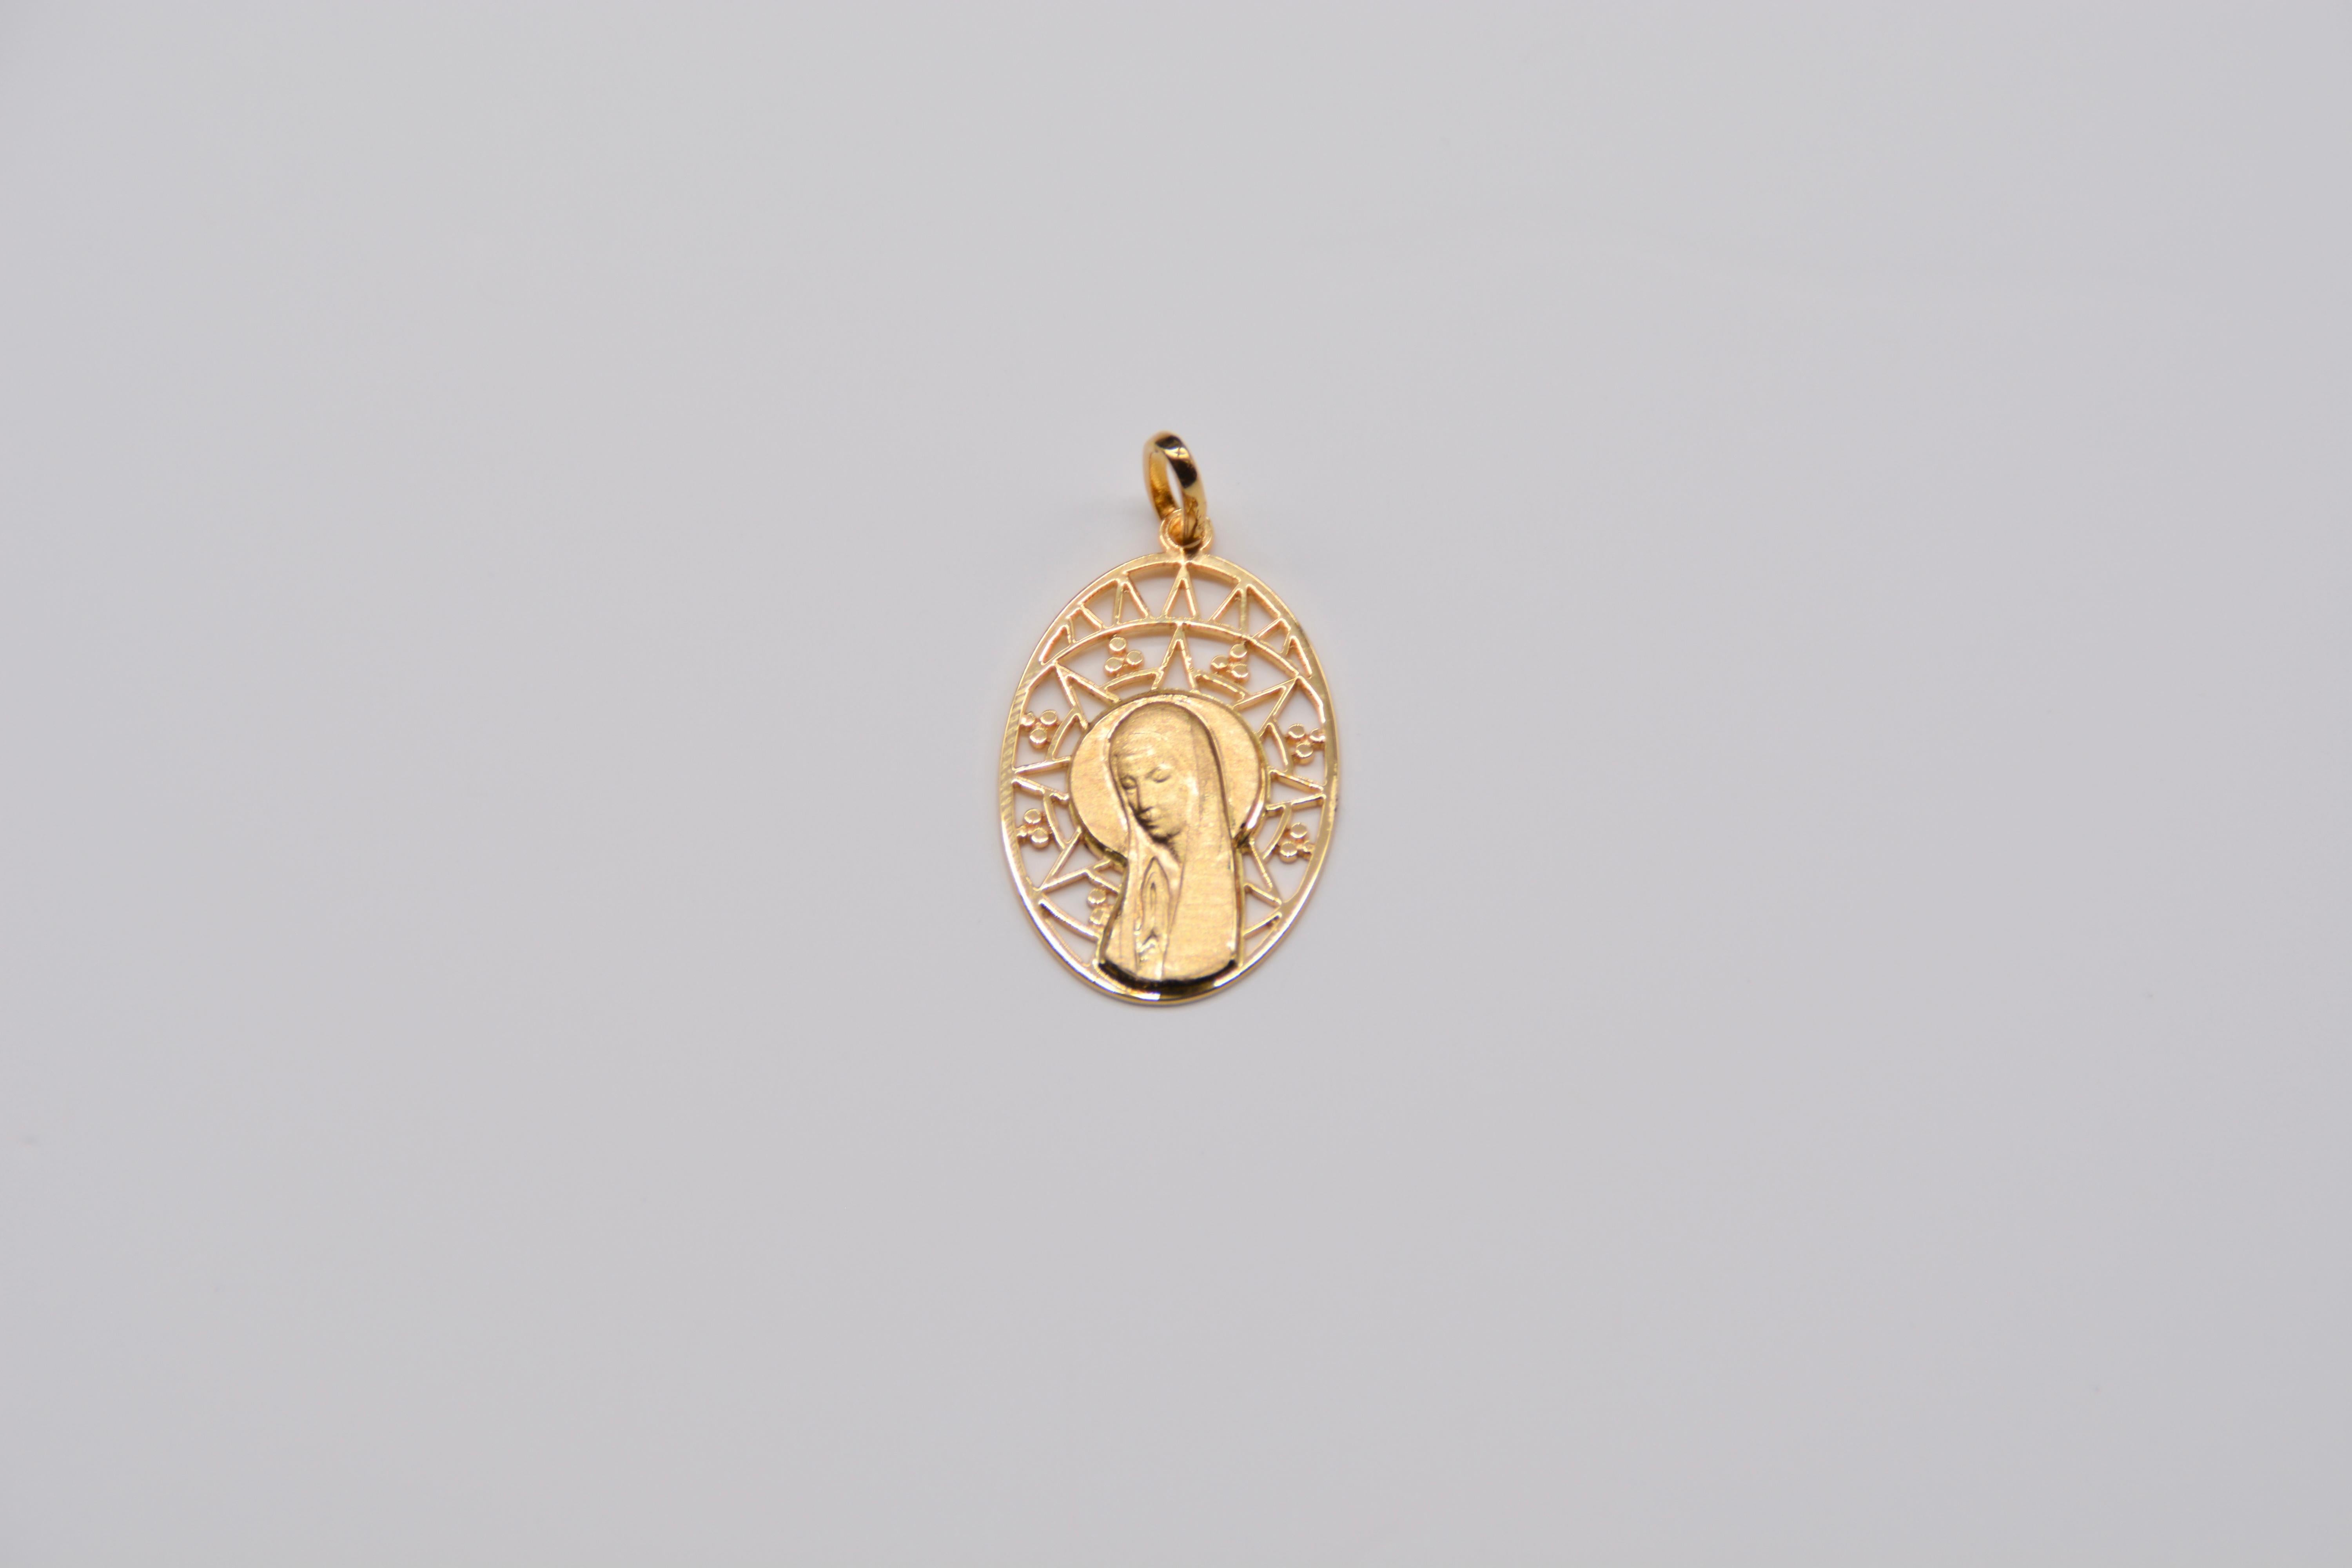 Virgin Openwork Medal Oval Gold Yellow

This beautiful 18ct yellow gold Virgin Mary medal is an iconic religious piece that will be appreciated by believers and collectors of religious medals. The Virgin is finely depicted with a halo, and her image